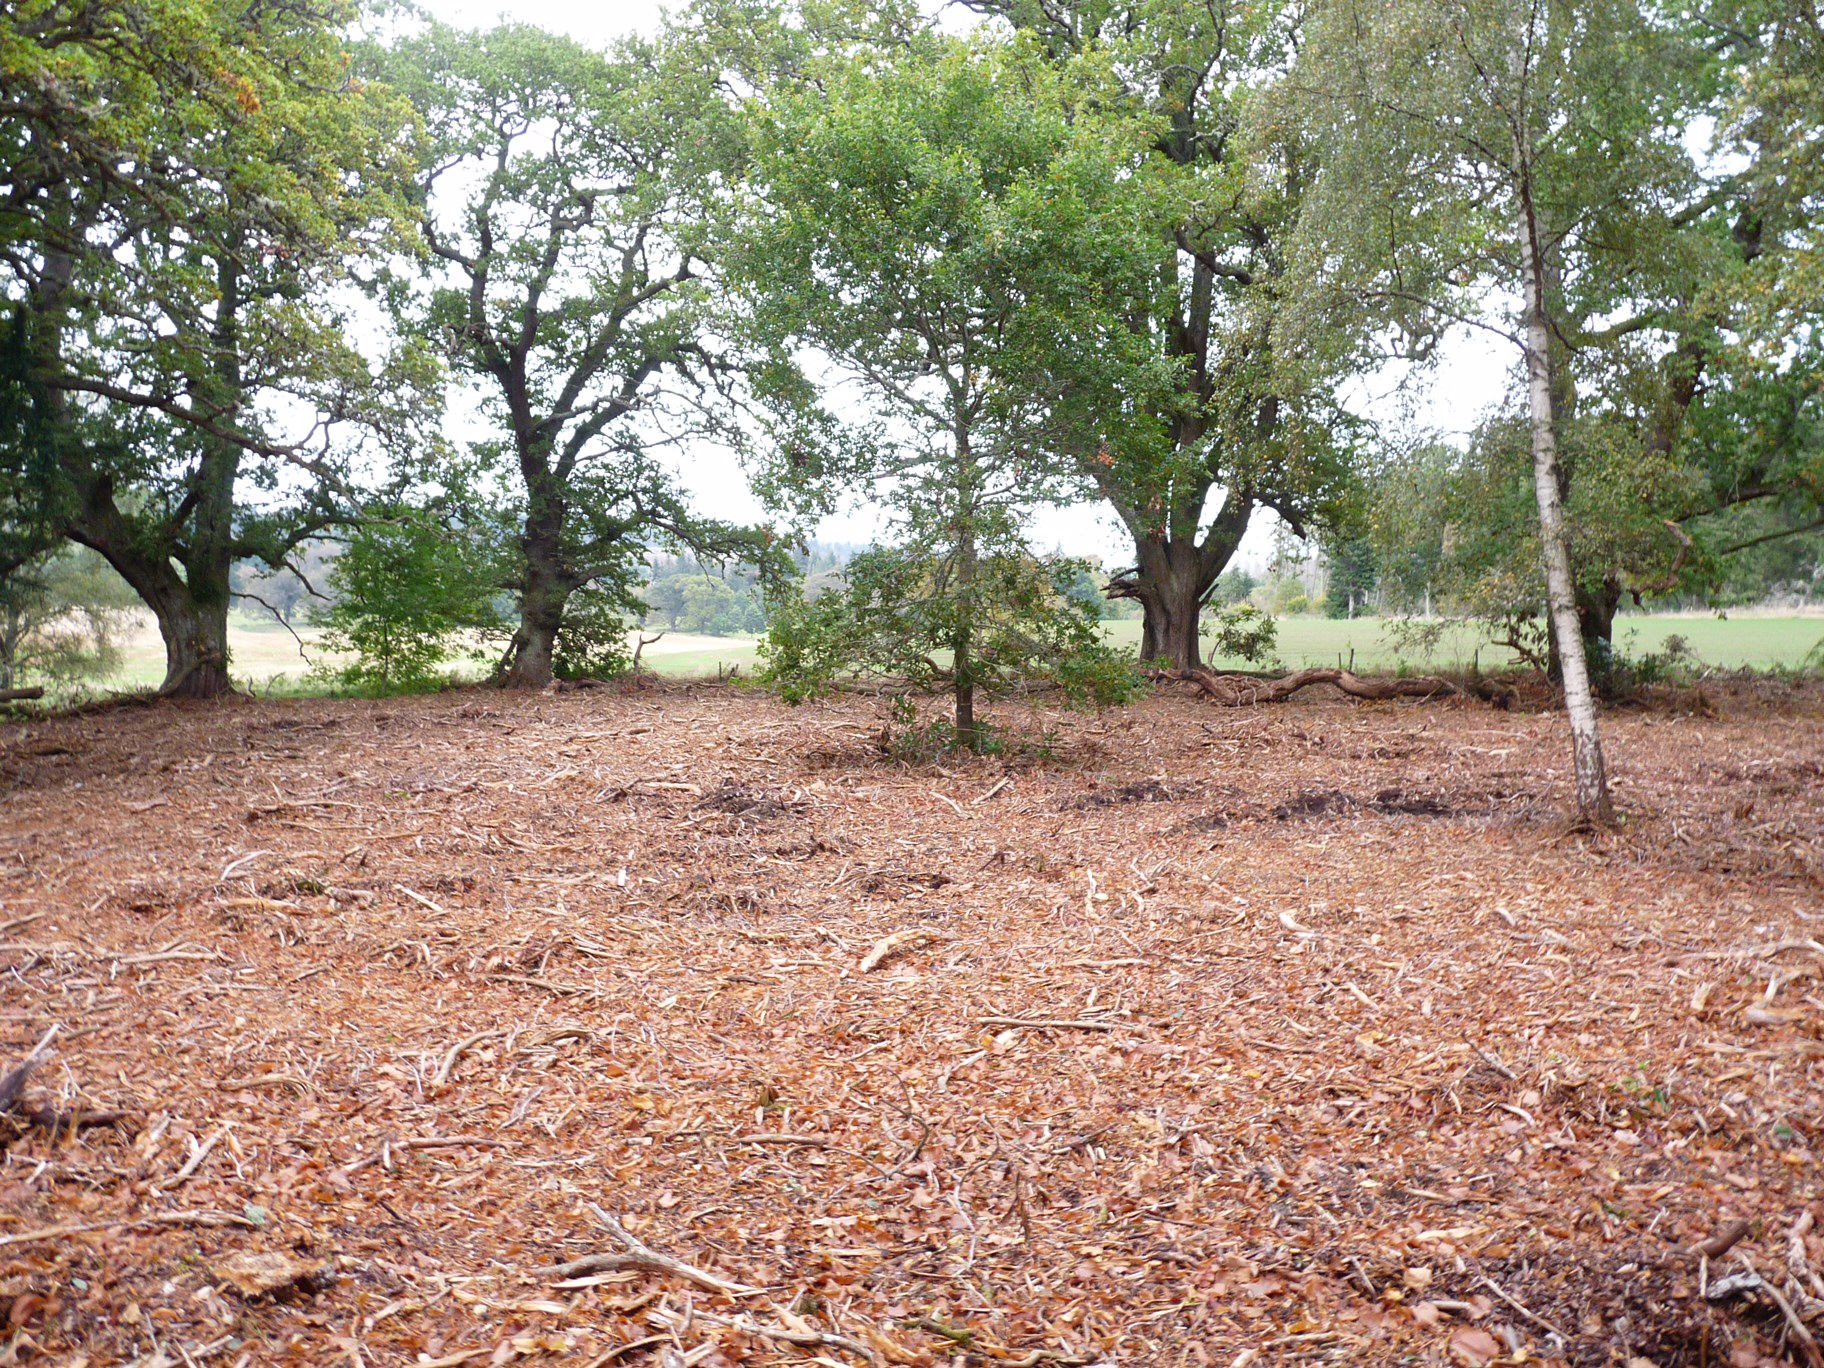 A rhododendron stand after being machine-mulched